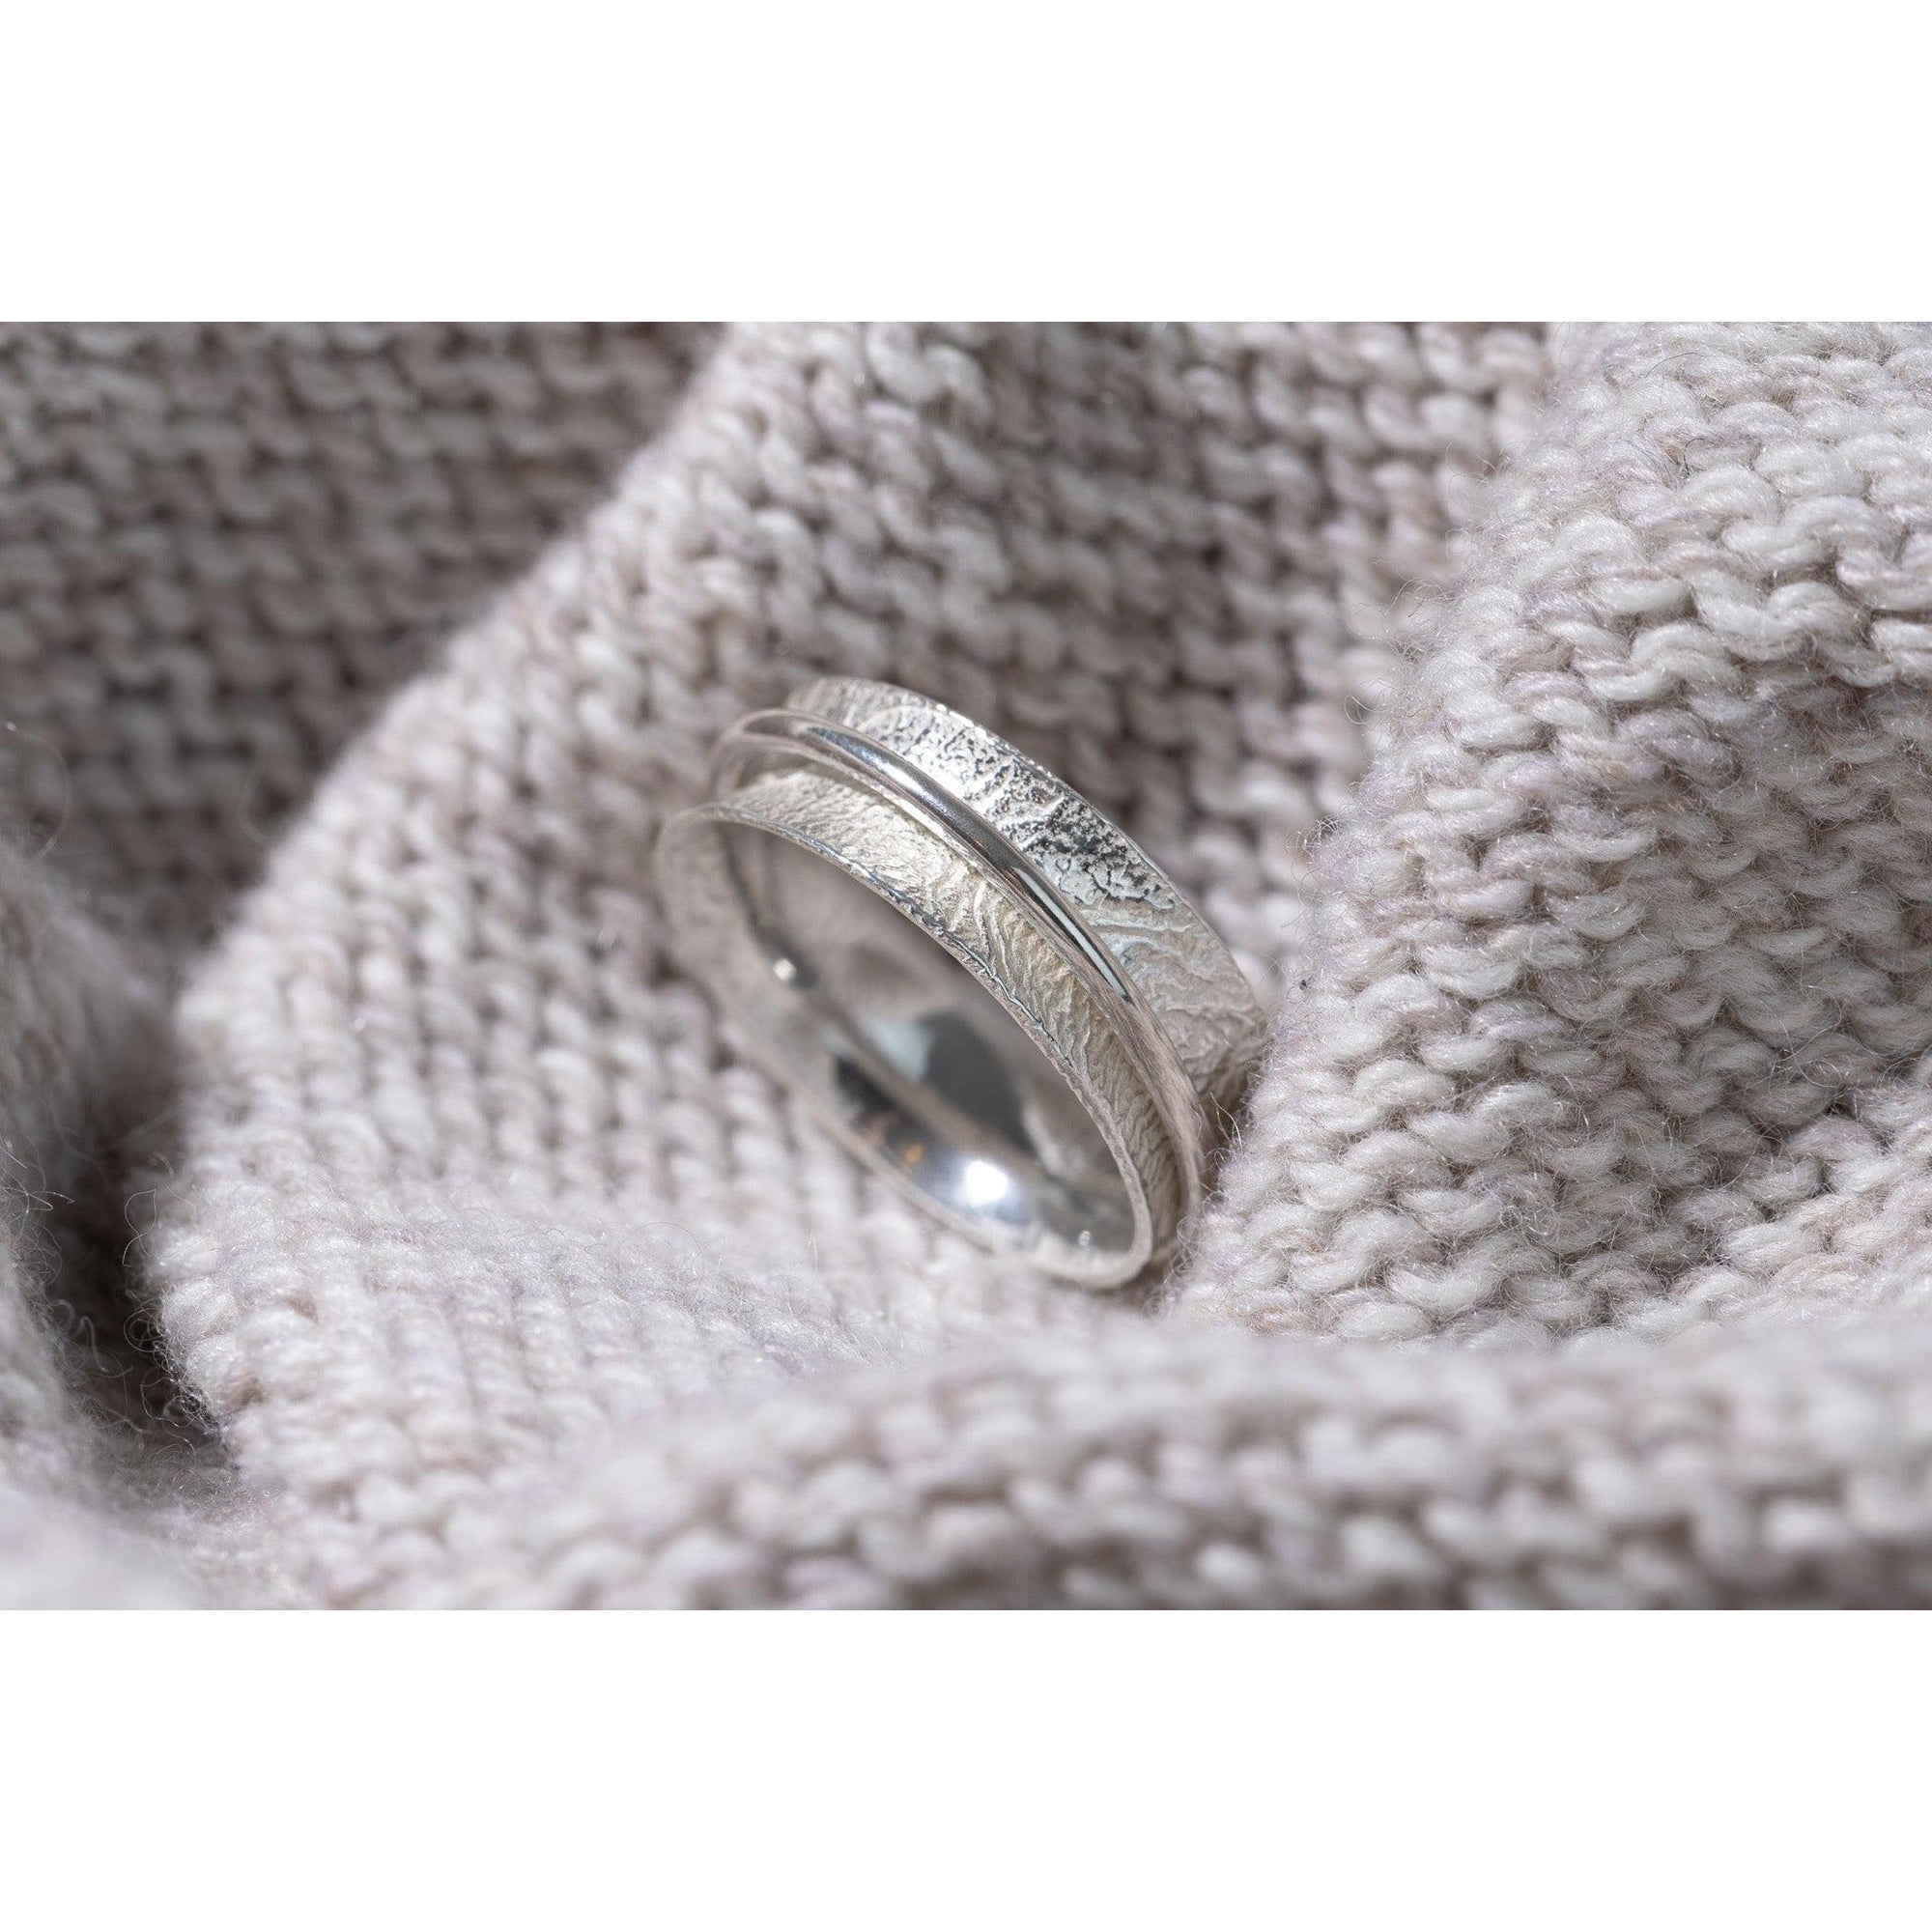 'LG51 - Silver 'Worry' Ring' by Les Grimshaw, available at Padstow Gallery, Cornwall